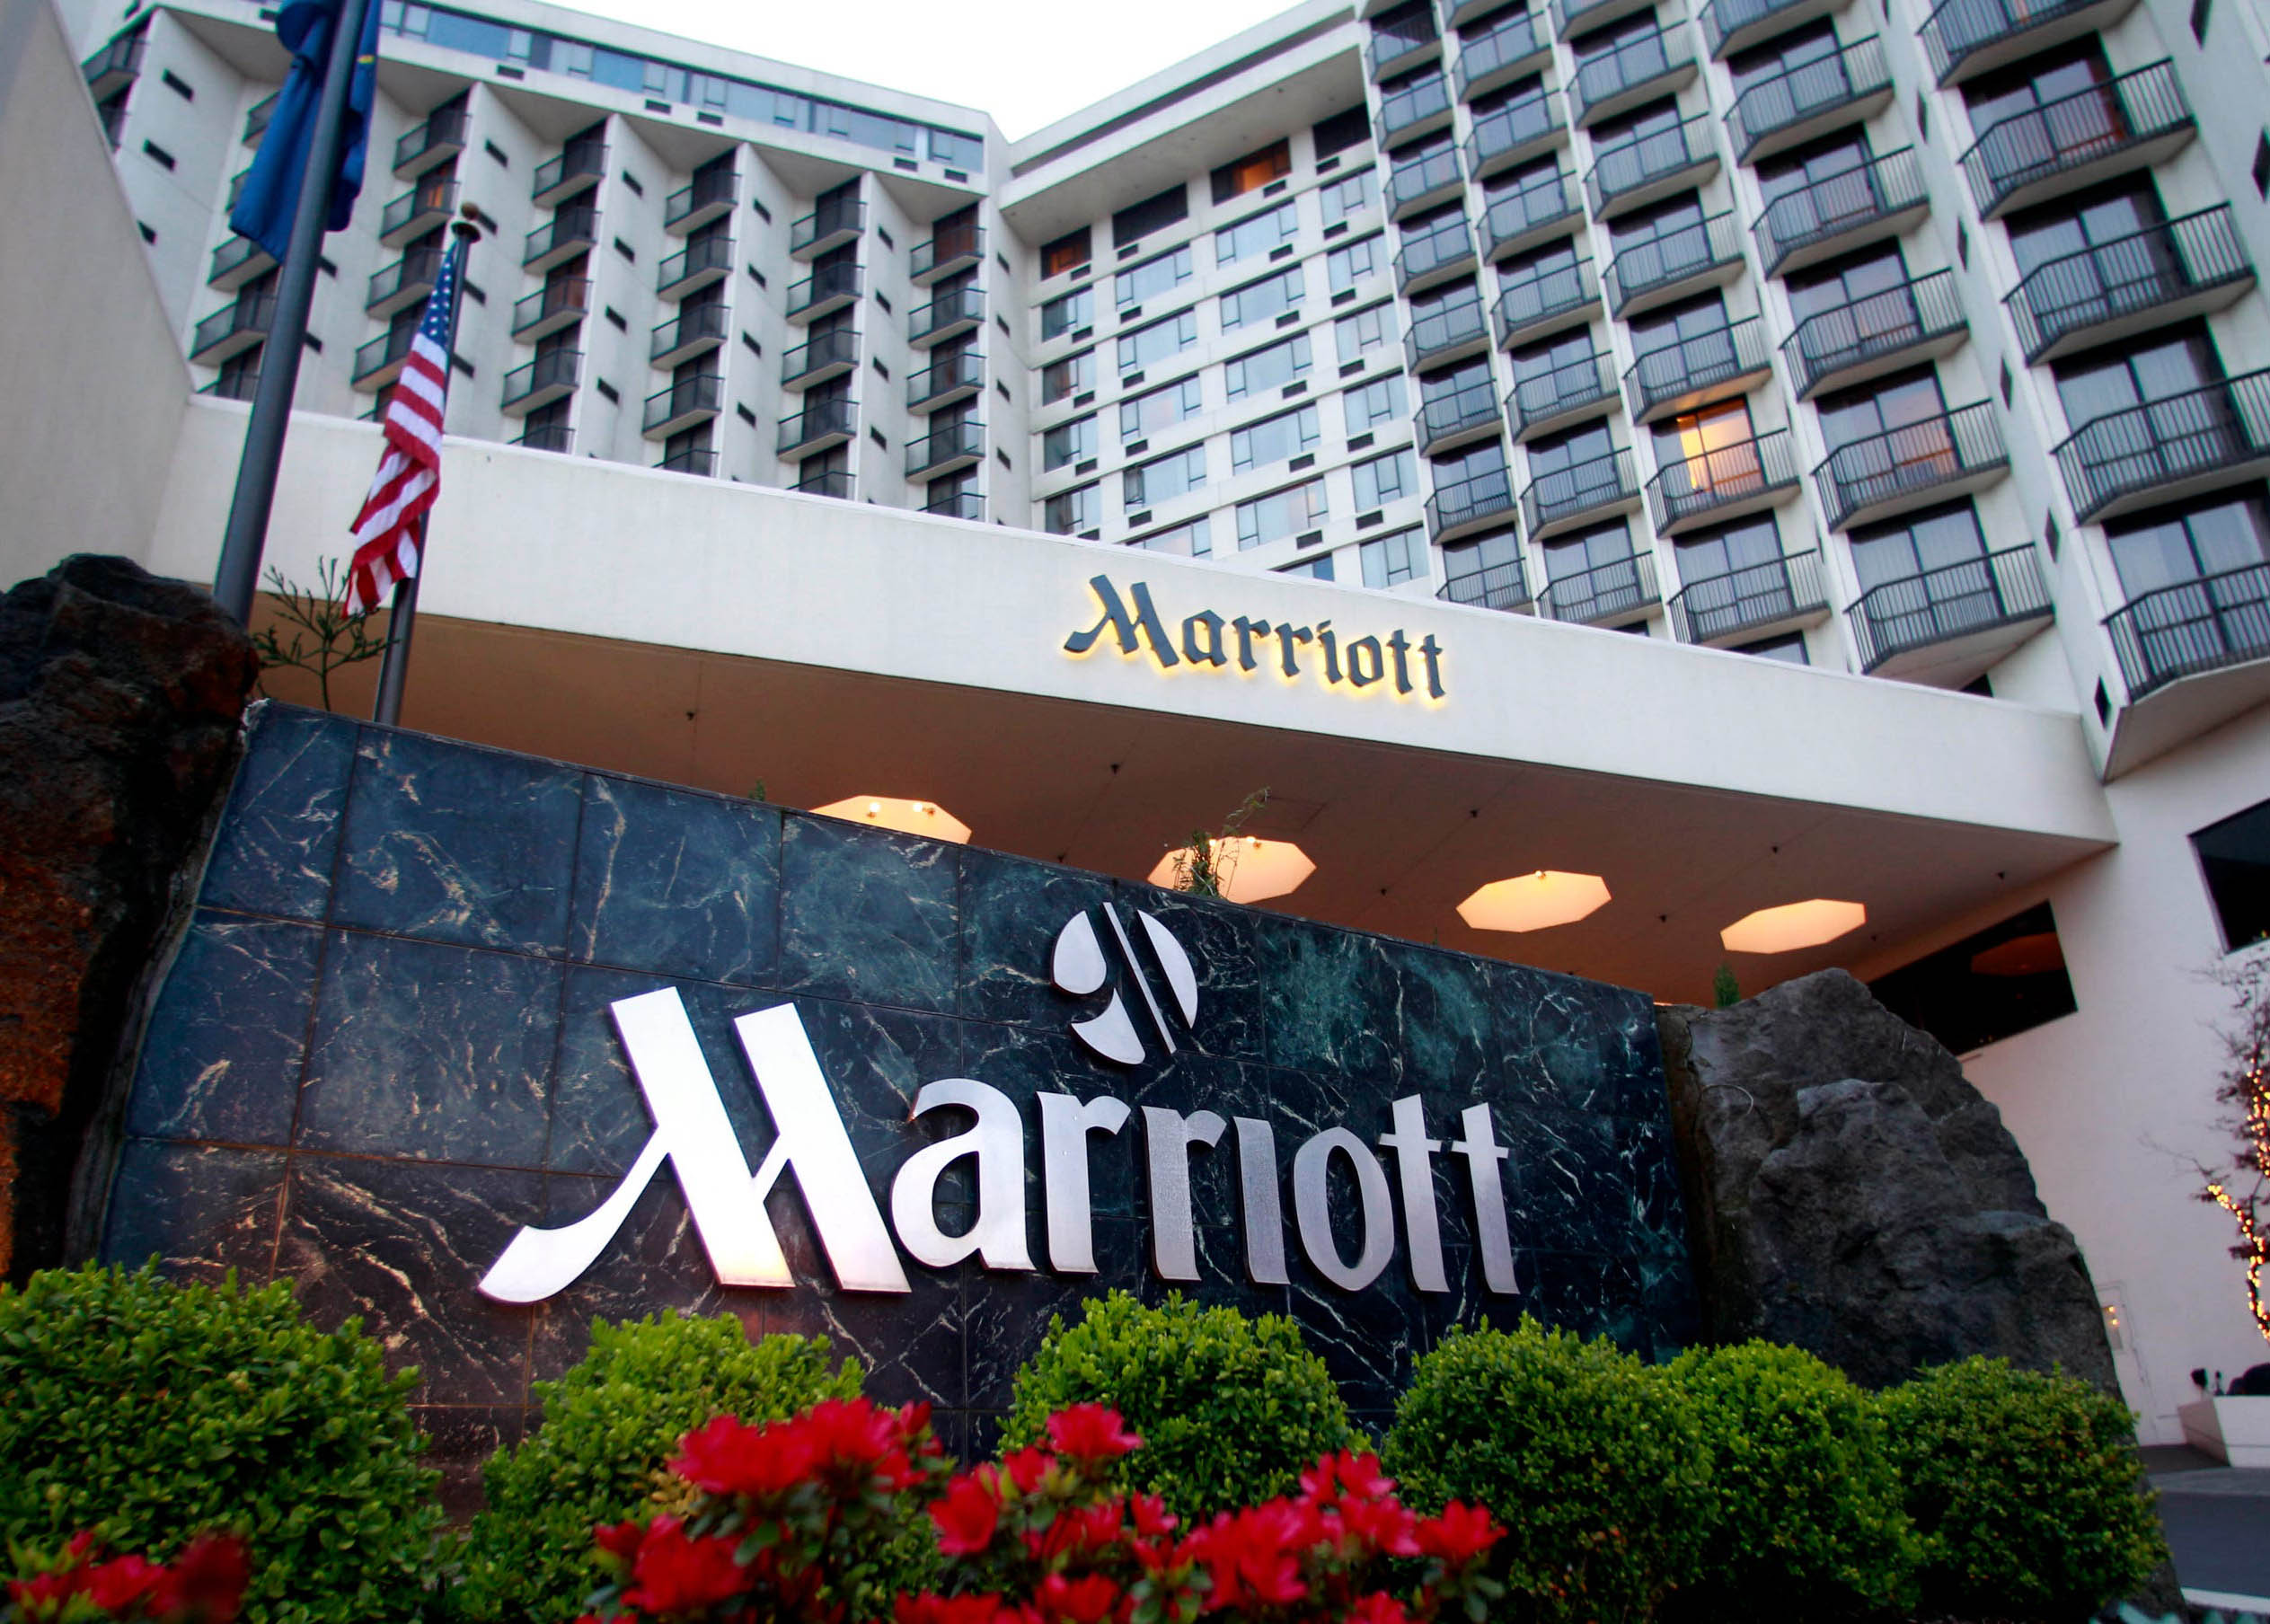 What To Make of Marriott’s Post-Pandemic Playbook